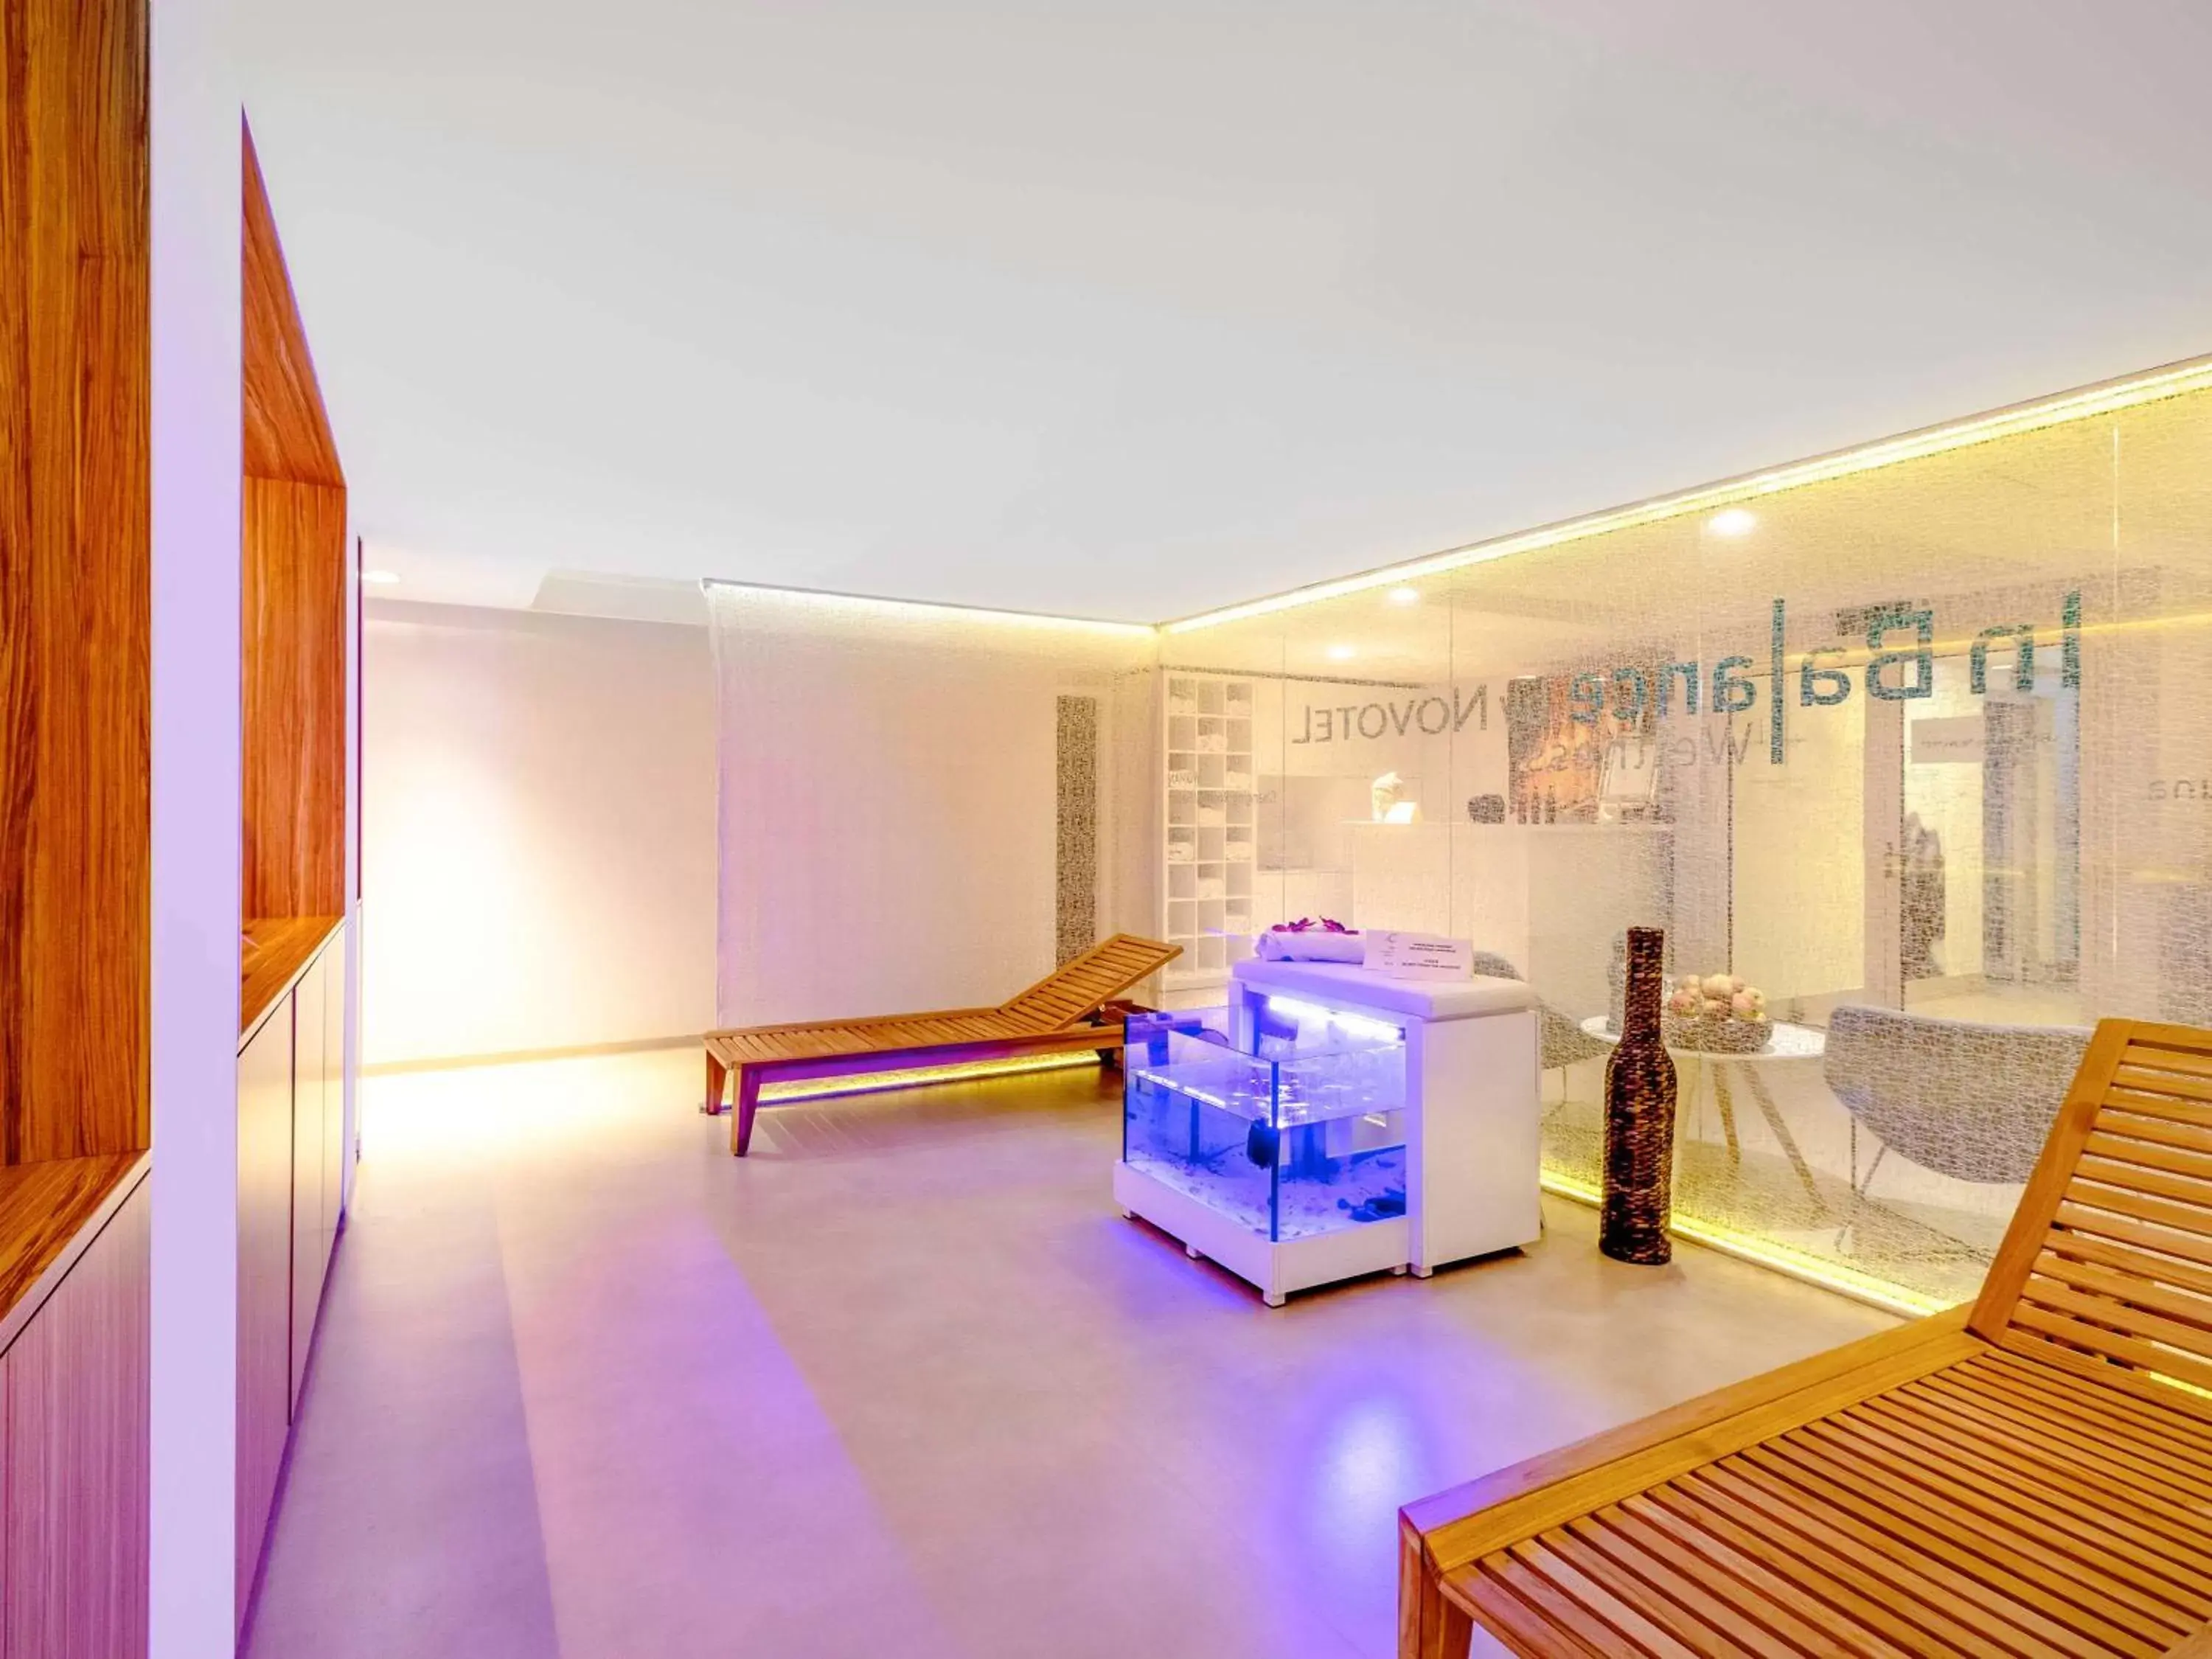 Spa and wellness centre/facilities in Novotel Warszawa Airport